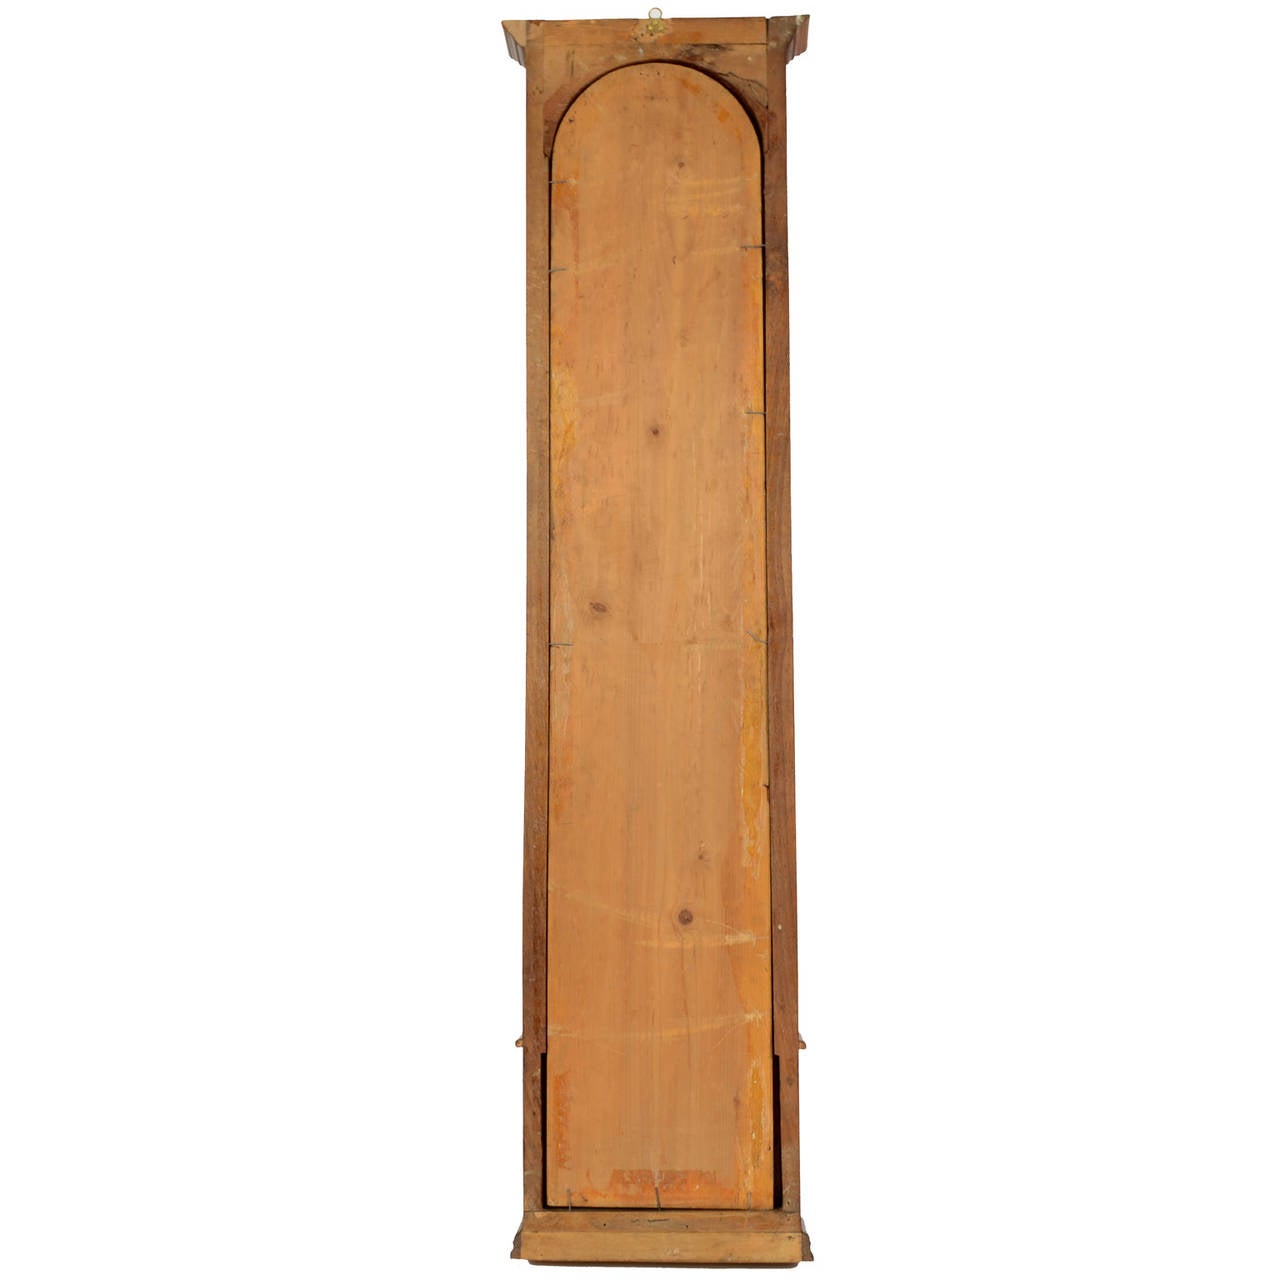 Barometer made in the late 19th century by Anselmo Mombelli from Lugano. The barometer tube is placed inside a walnut and glass cabinet. In addition to the barometric scale, it shows numerous scales on two printed paper sheets glued on the bottom of